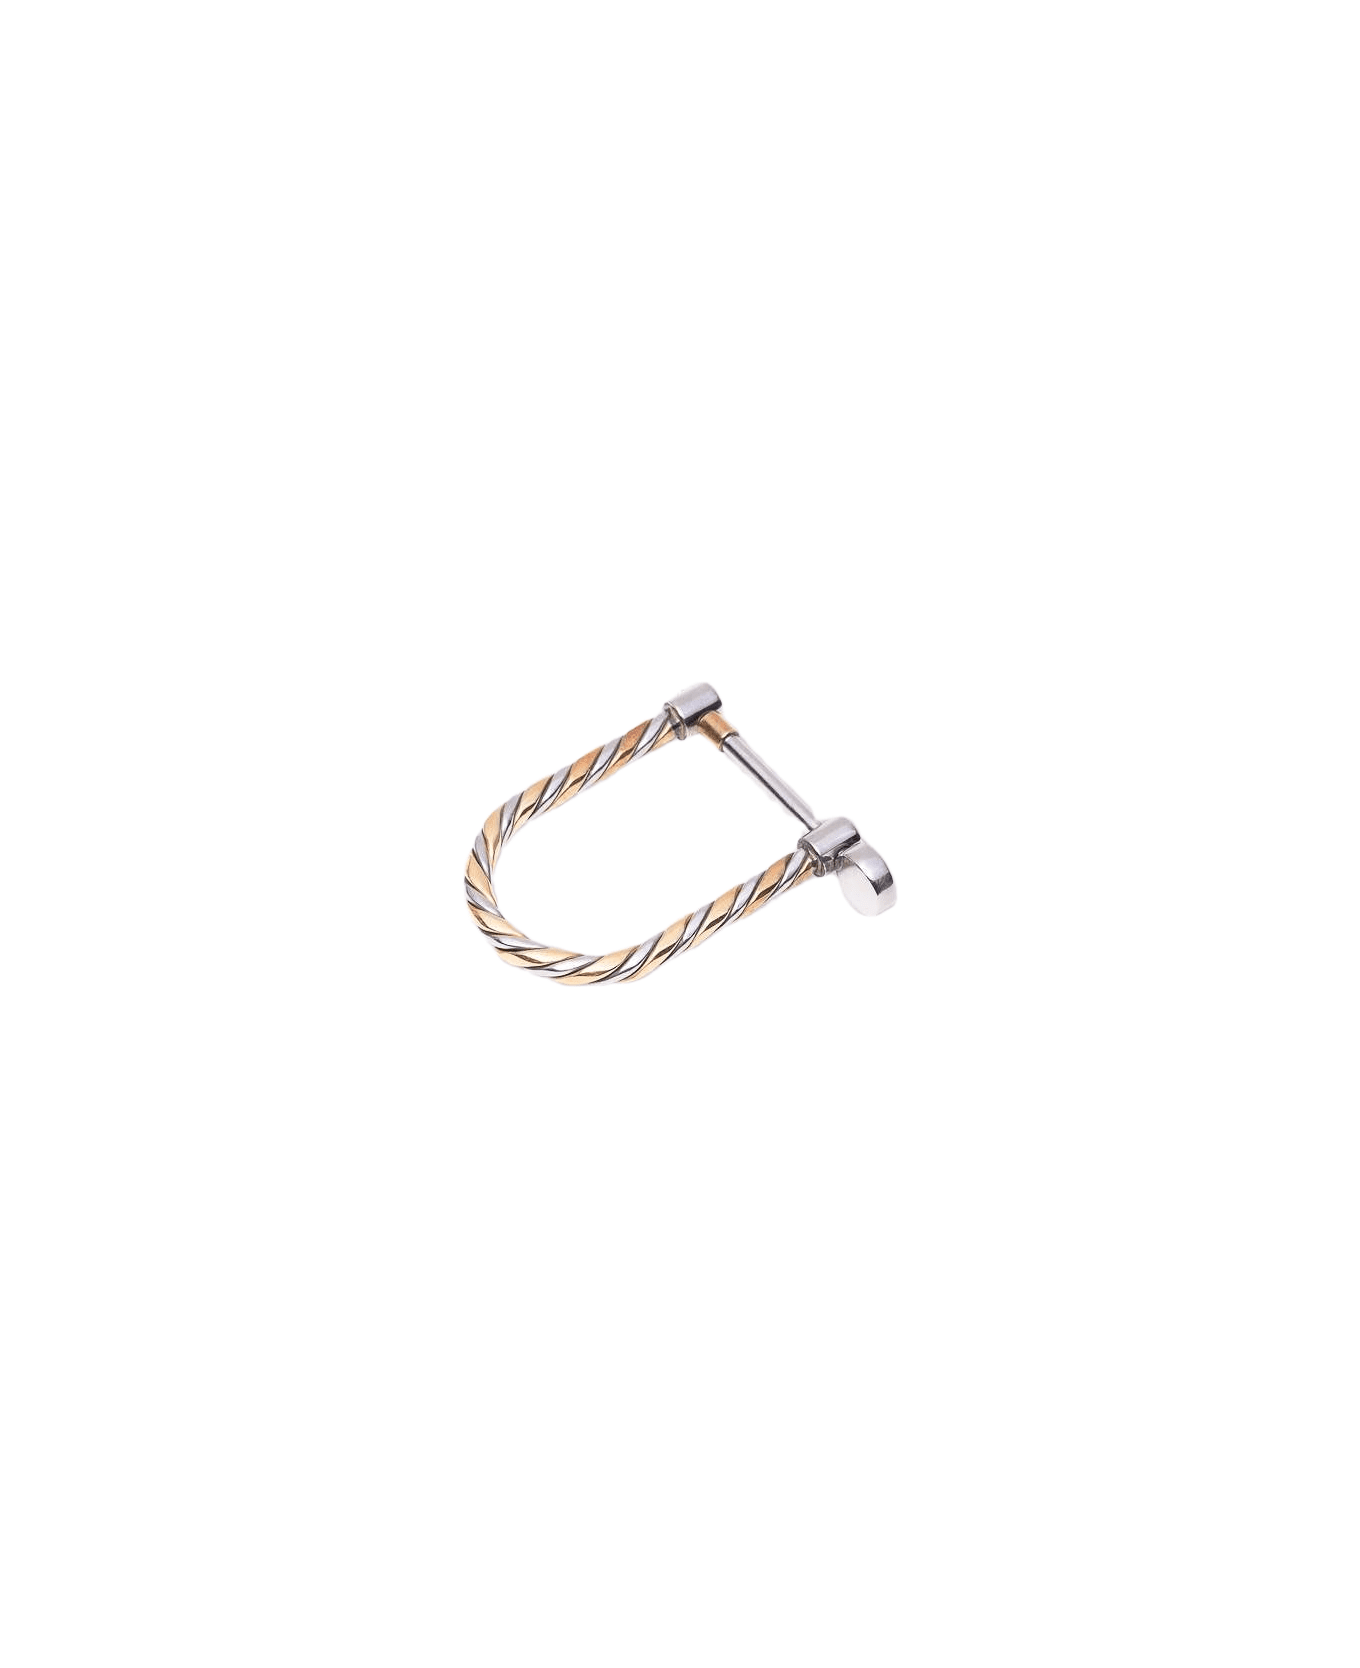 Larusmiani Stainless Steel And Yellow Gold Shackle Shaped Key Holder Keyring - Neutral キーリング